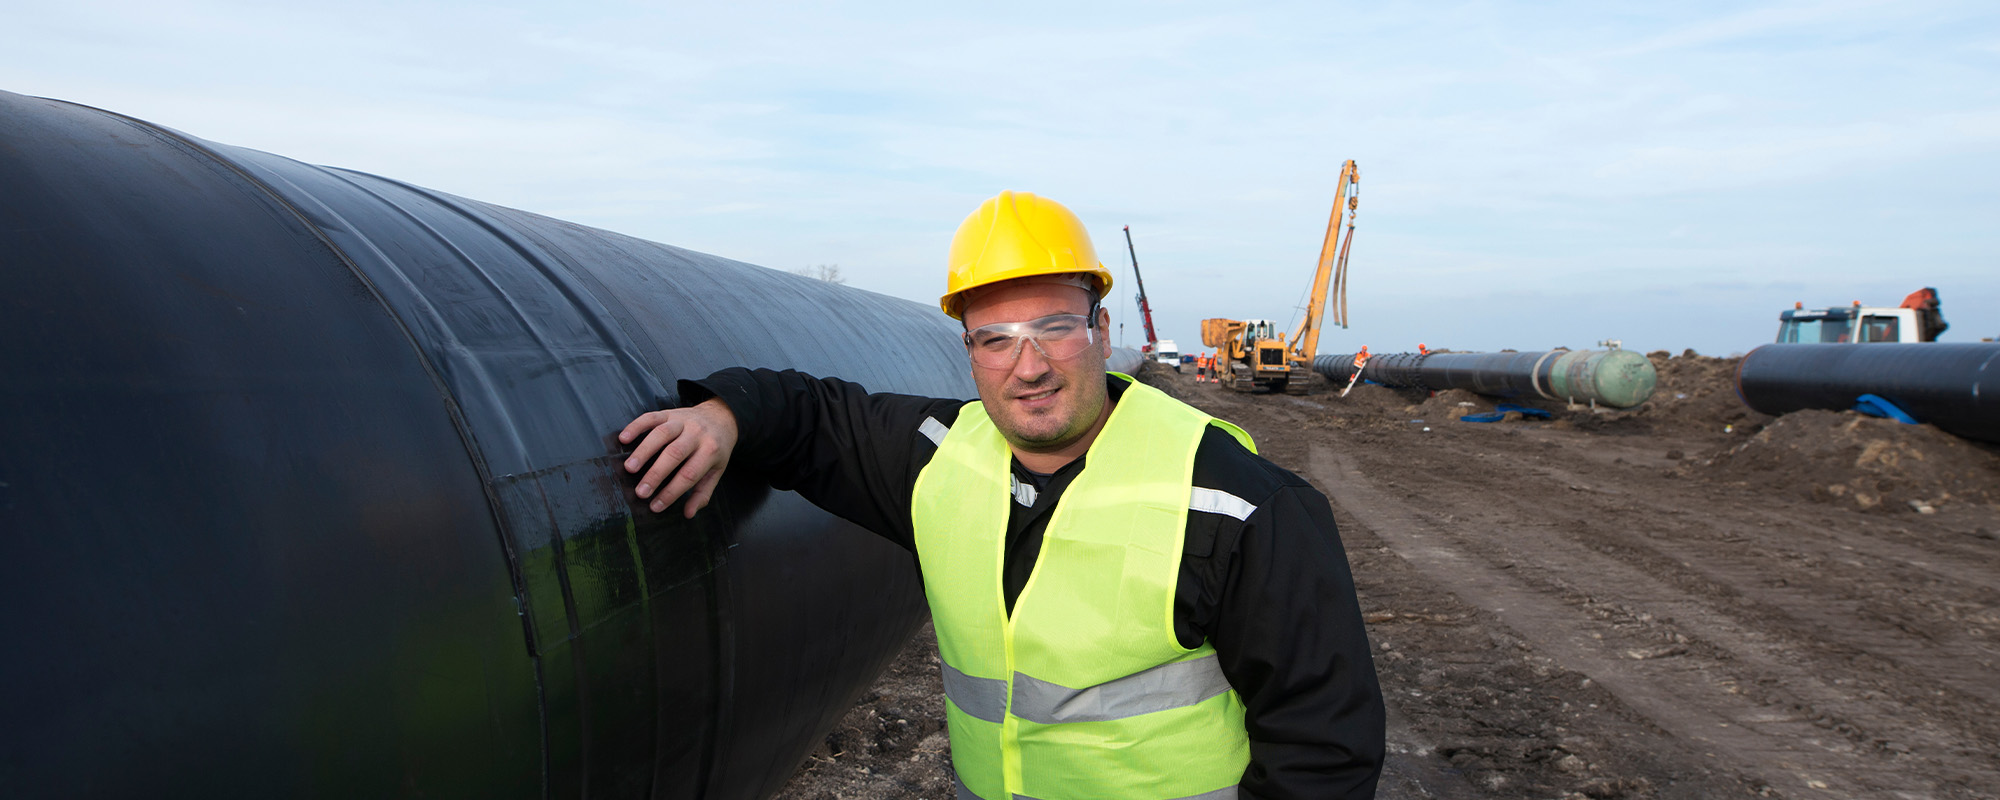 Portrait of an oilfield worker standing by gas pipe at construction site